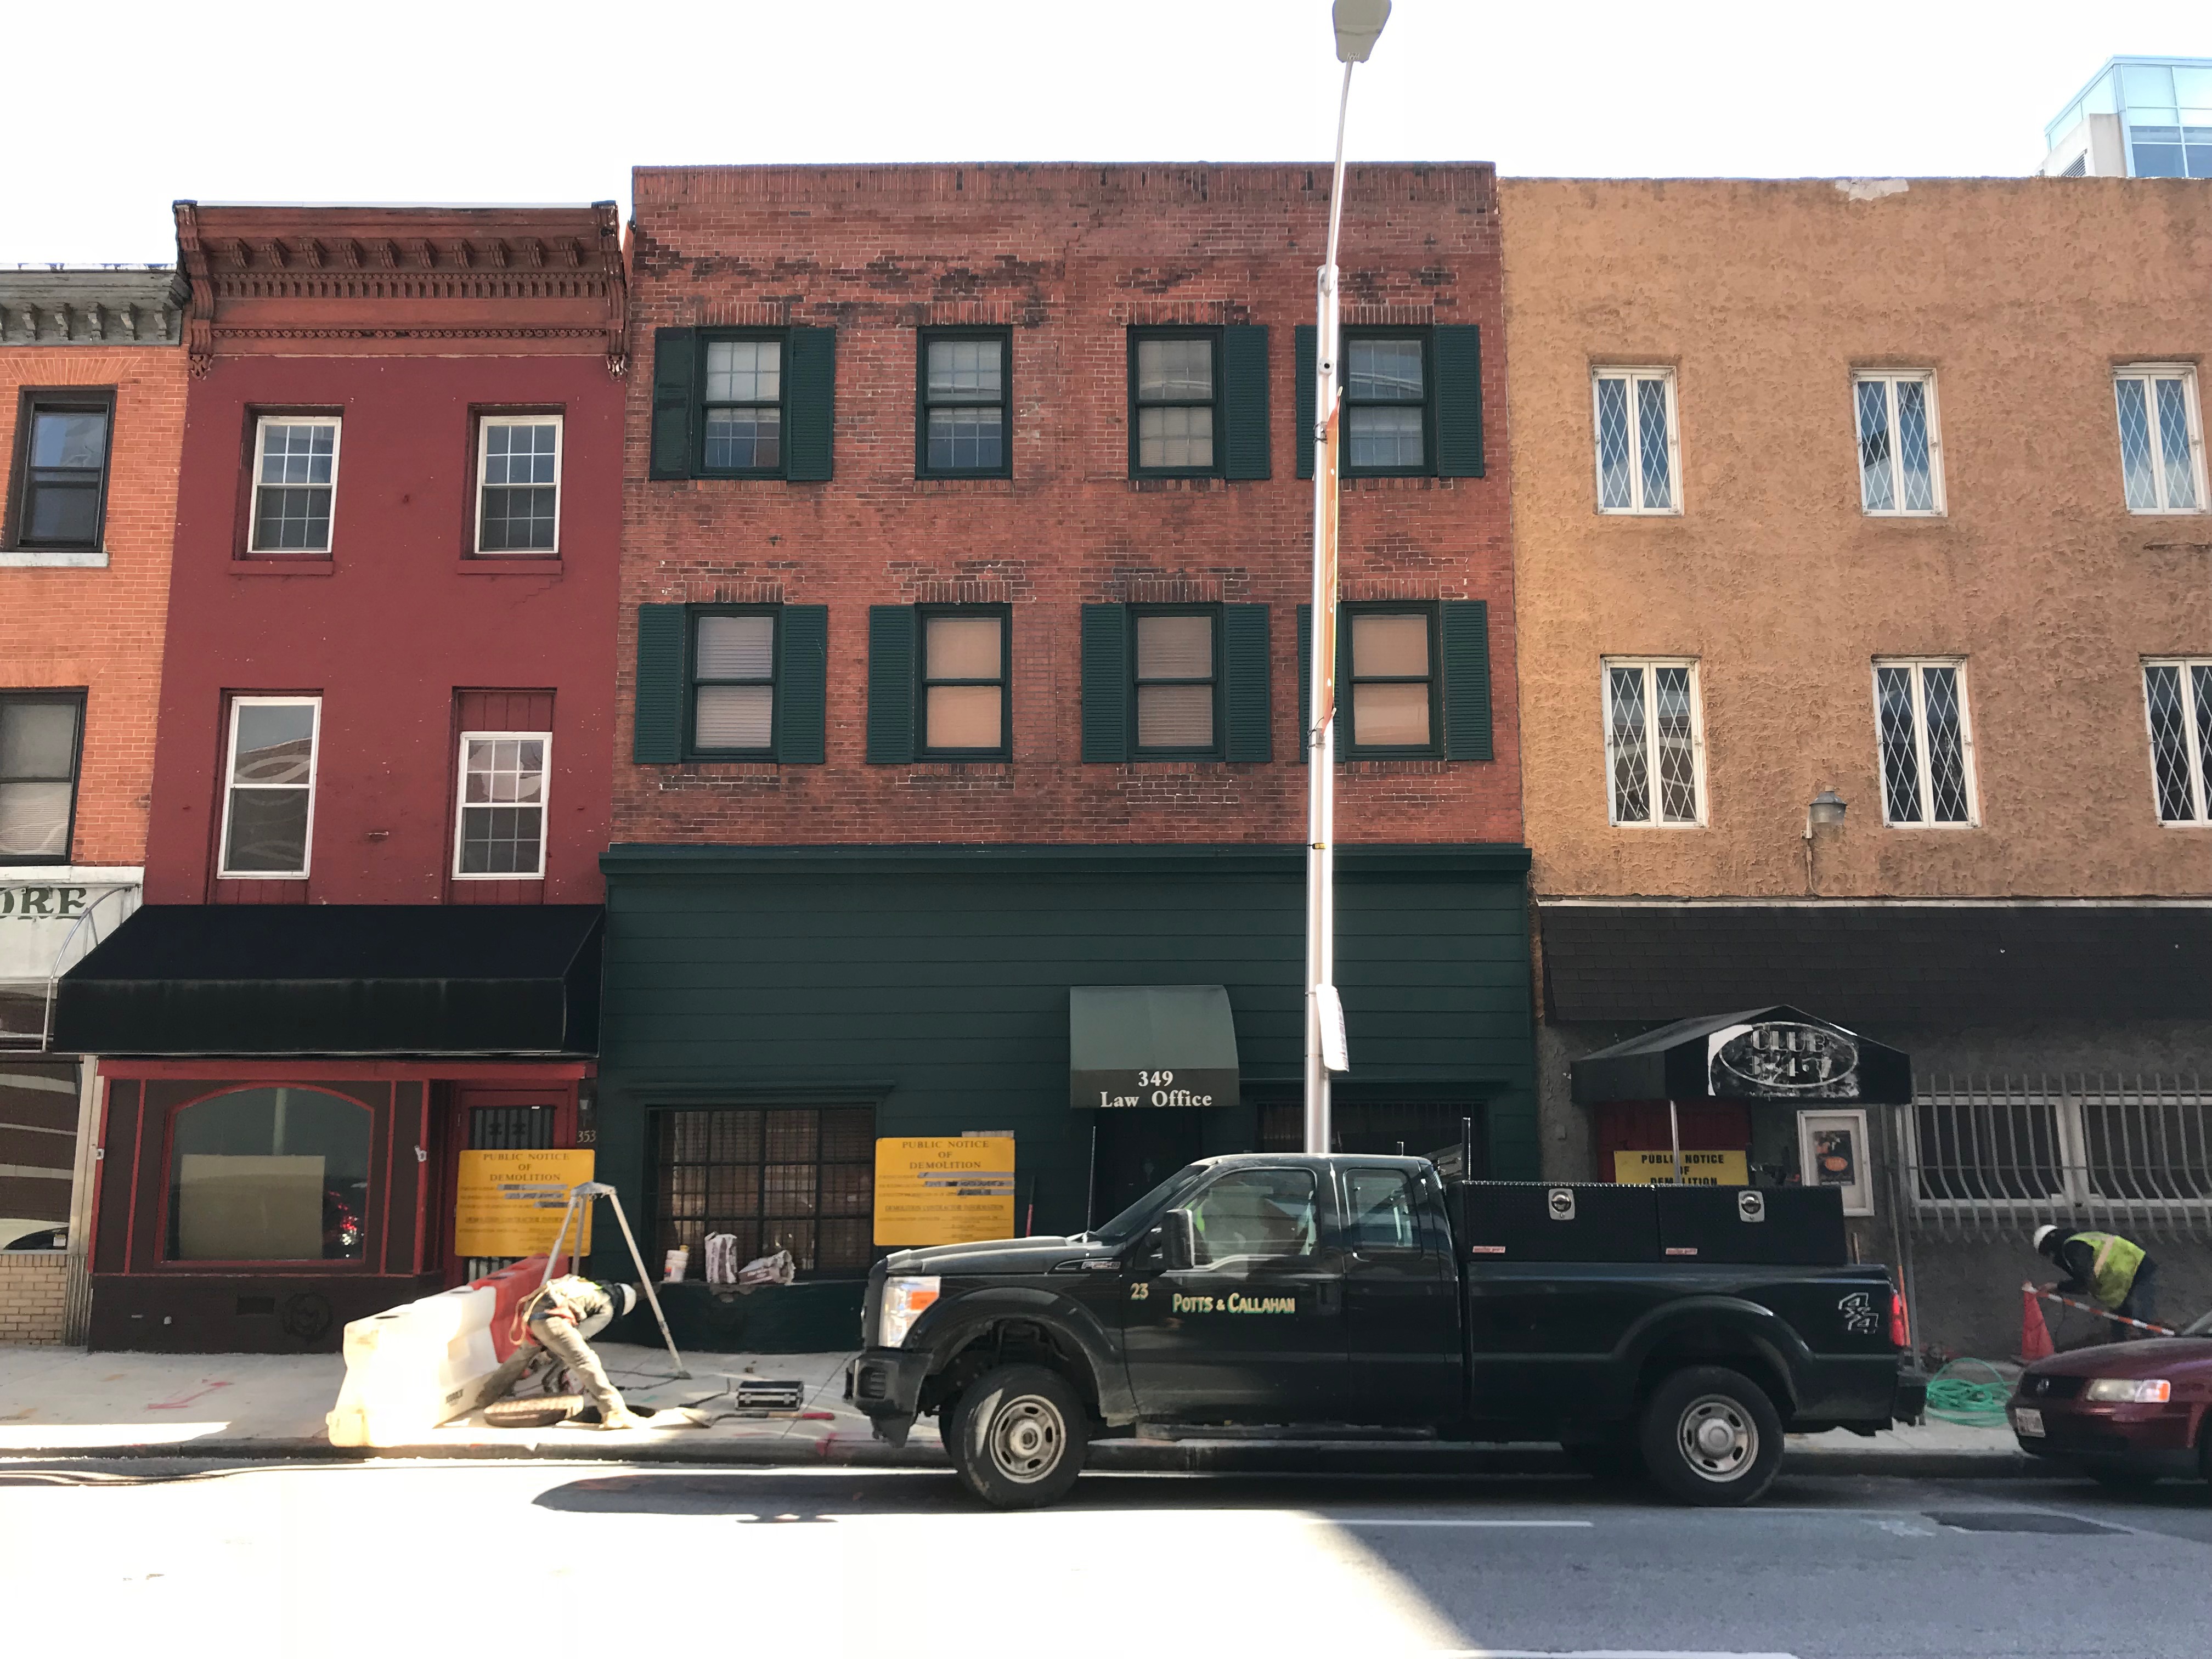 Commercial block proposed for demolition, 347-357 n. calvert street, baltimore, md 21202 photo